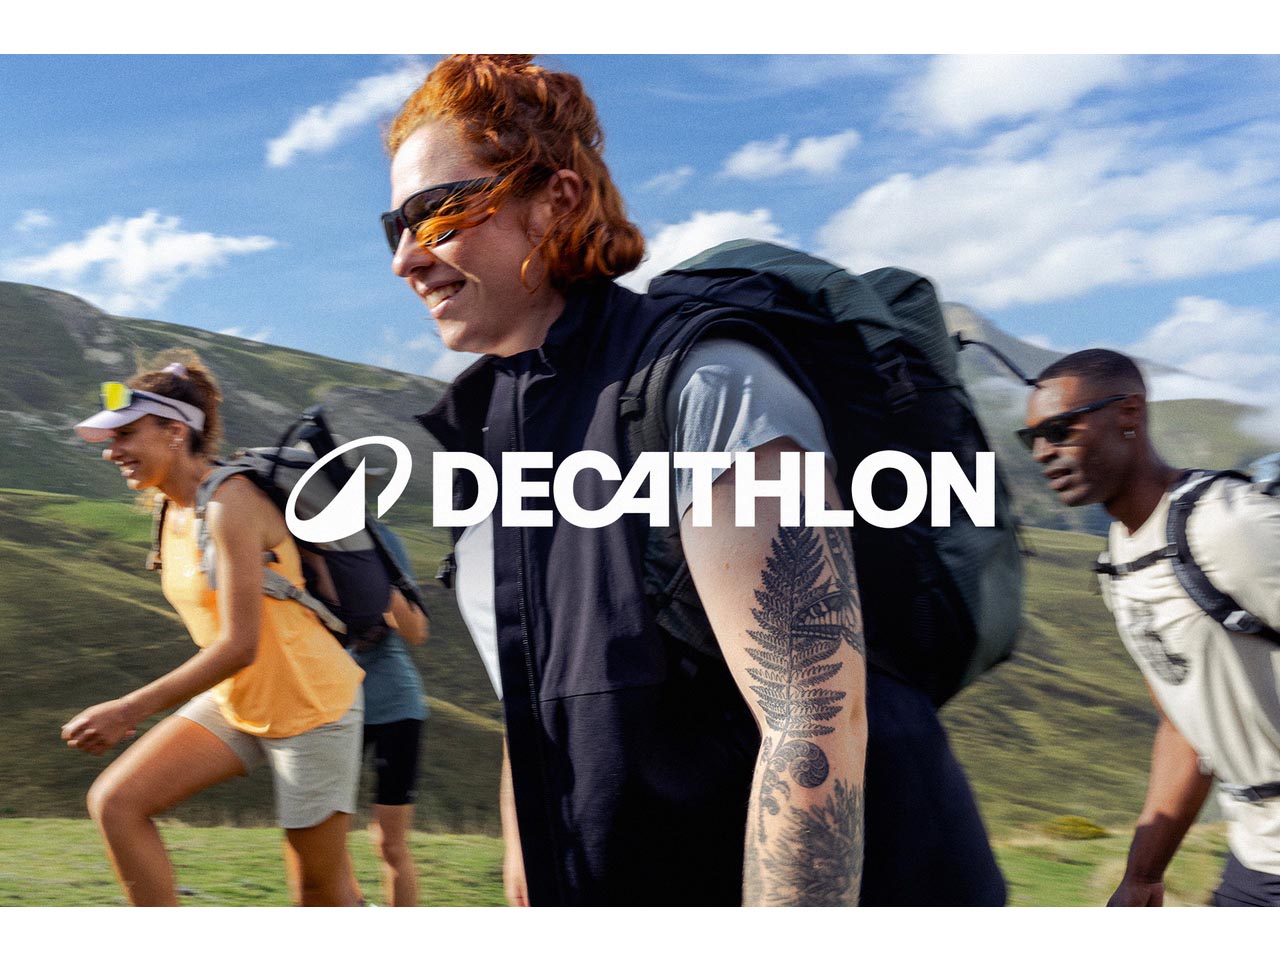 Wolff Olins’ reintroduces the Decathlon brand; AMV BBDO launches campaign centred around the concept of play